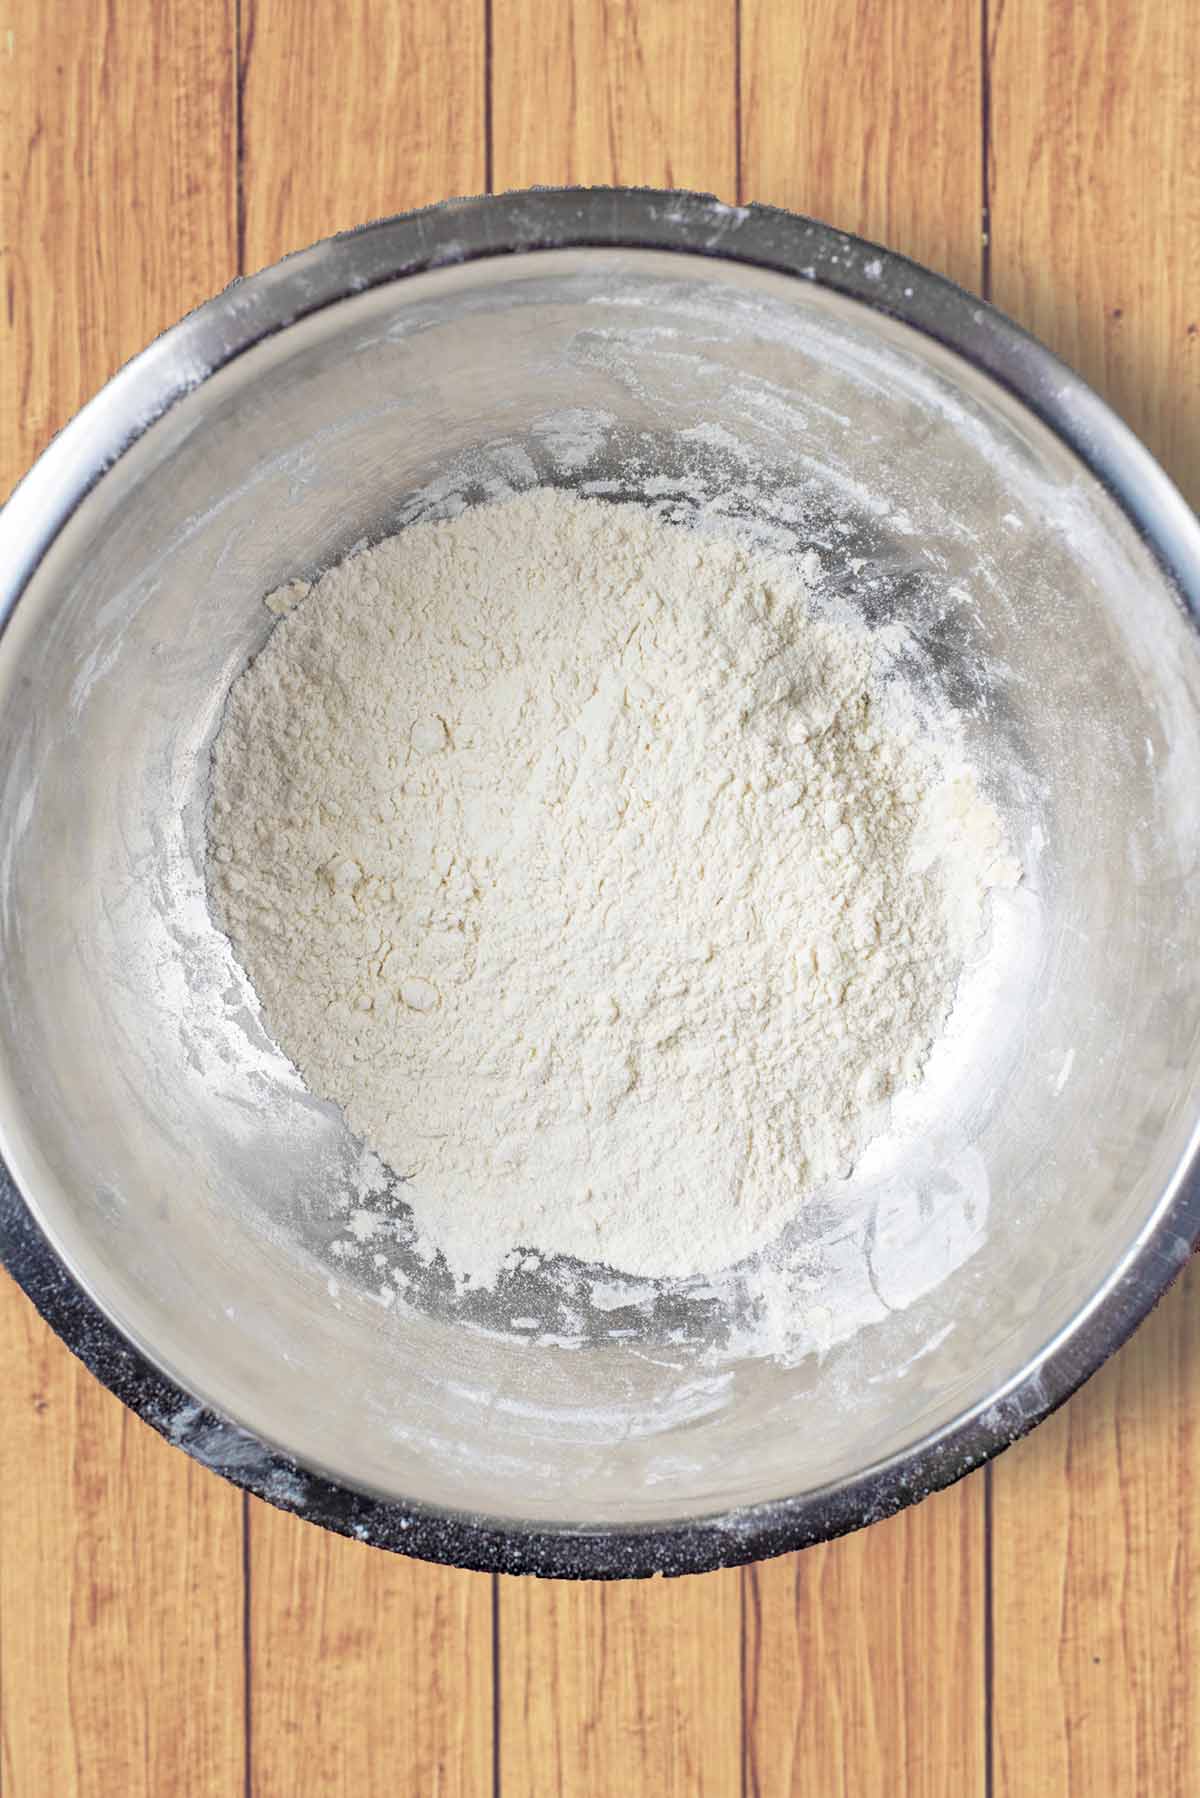 A stainless steel mixing bowl with flour in it.